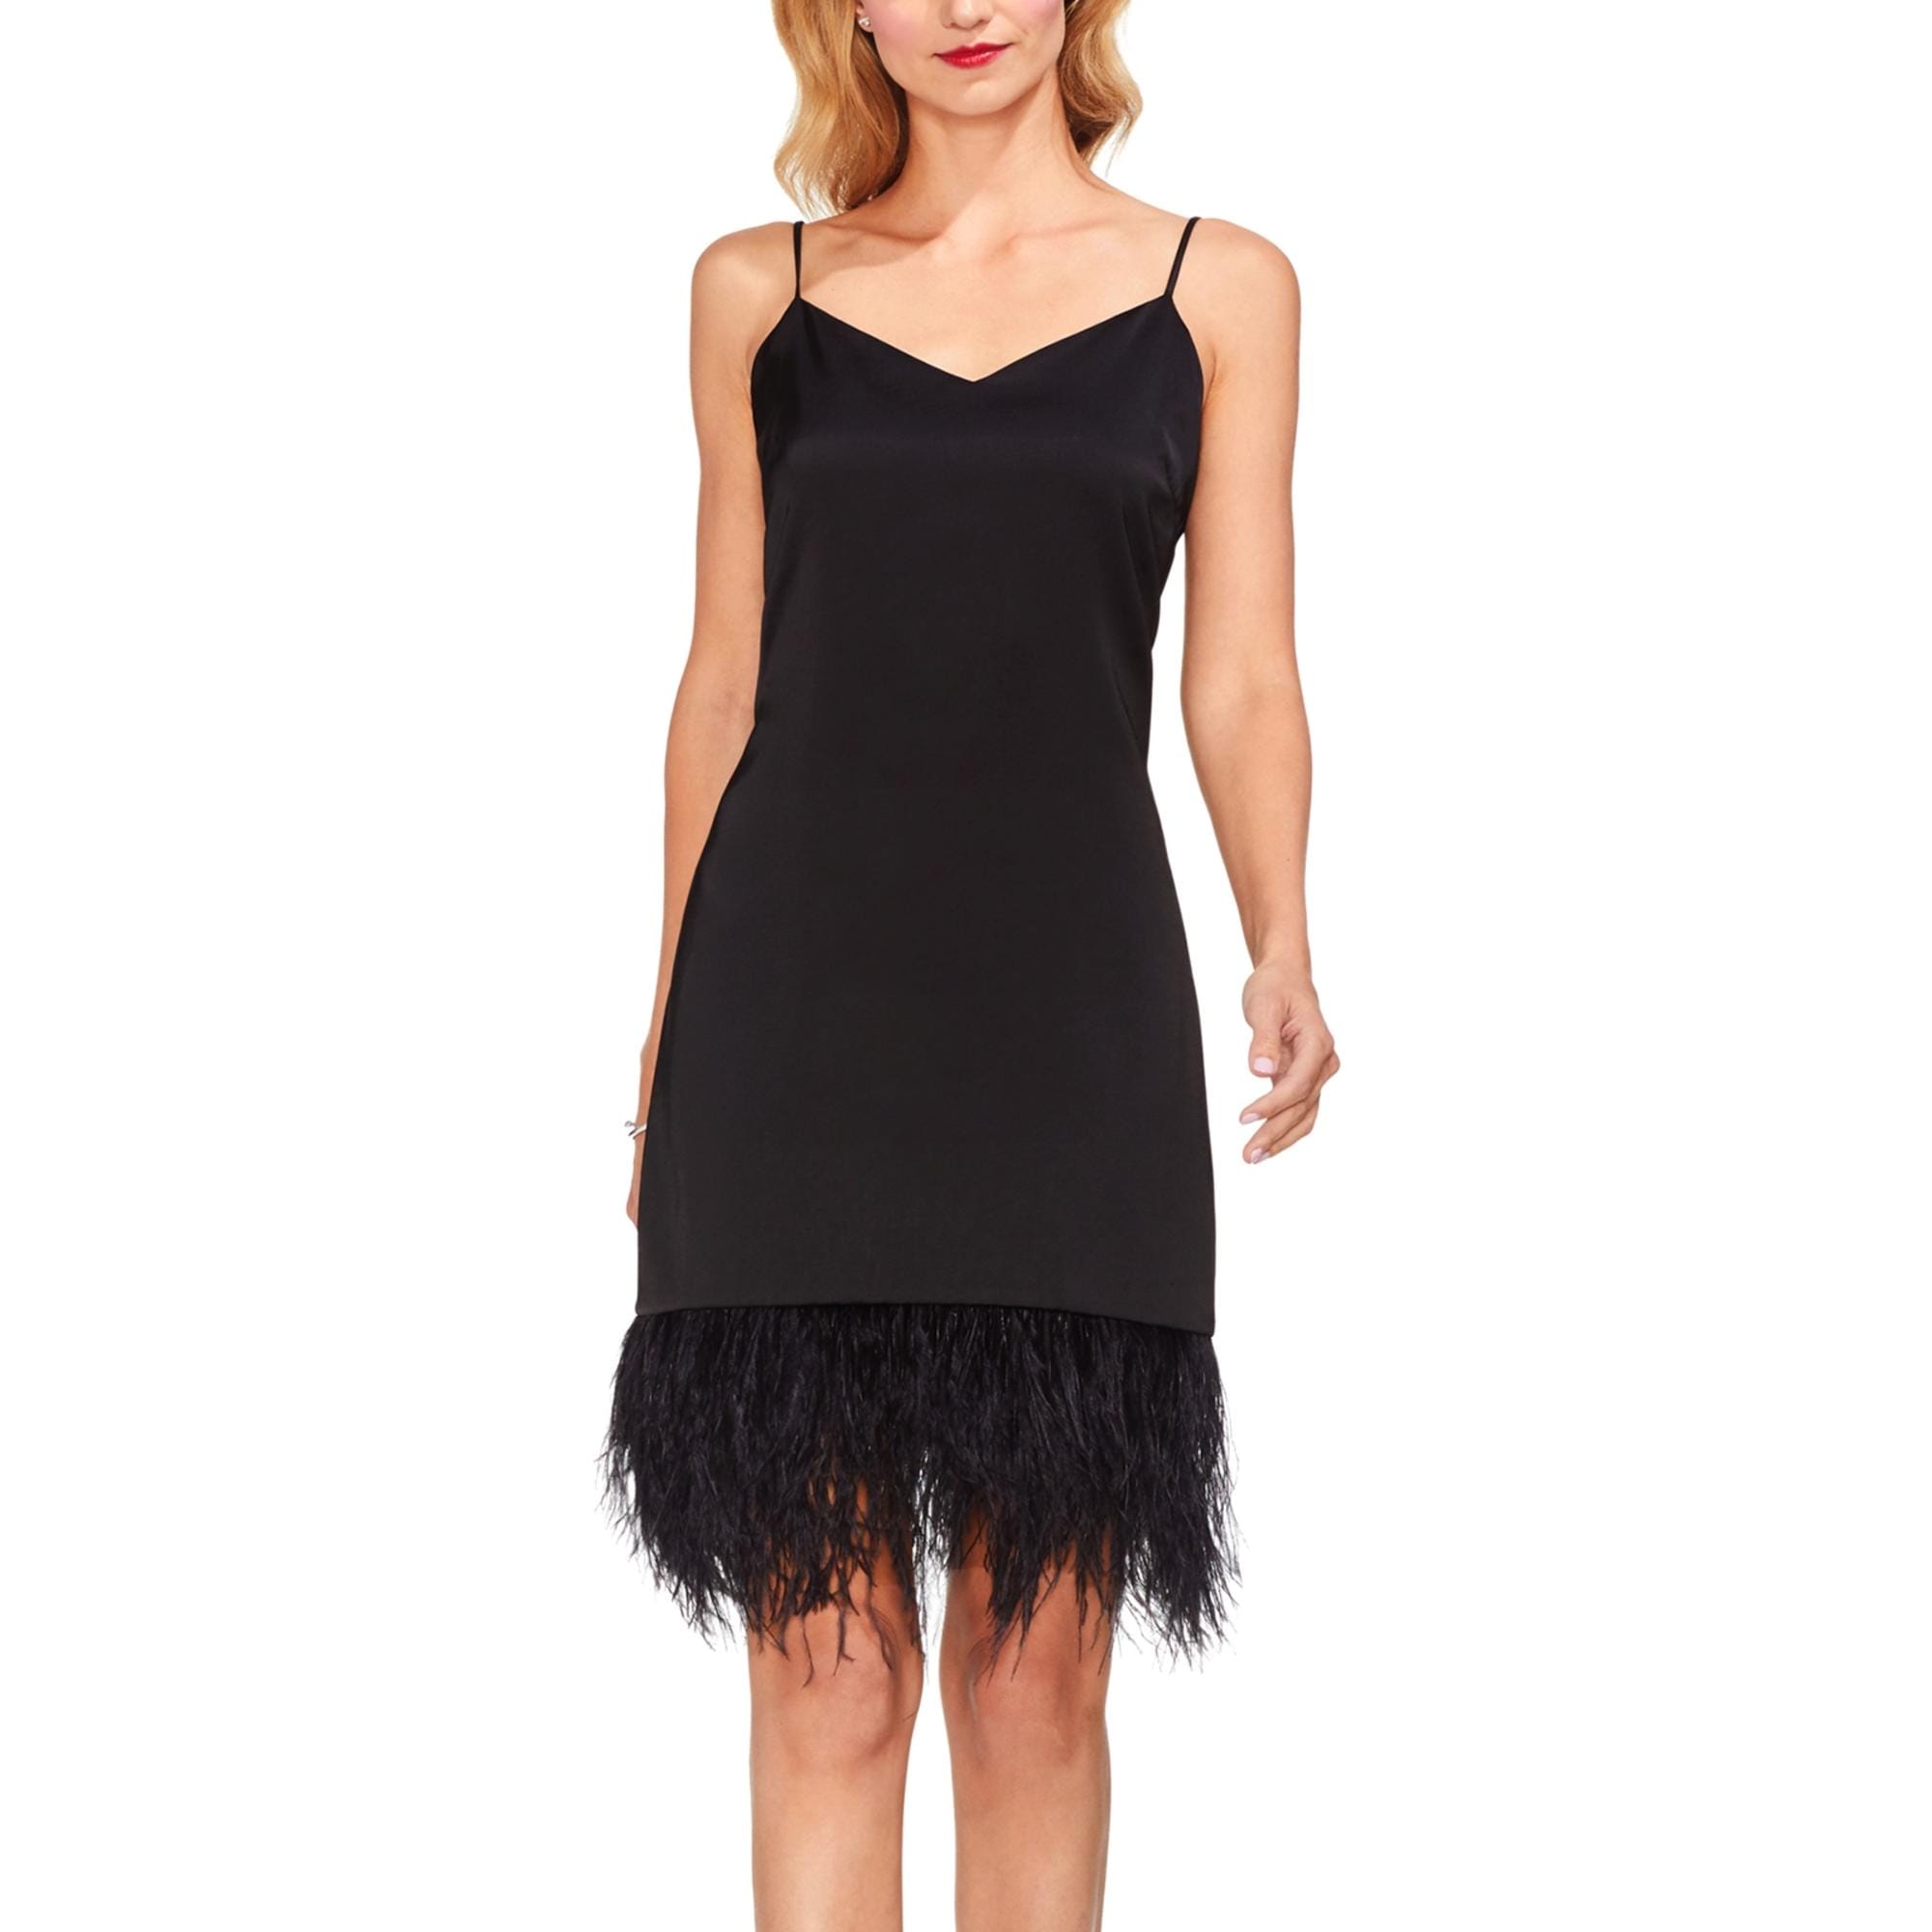 vince camuto feather trim dress